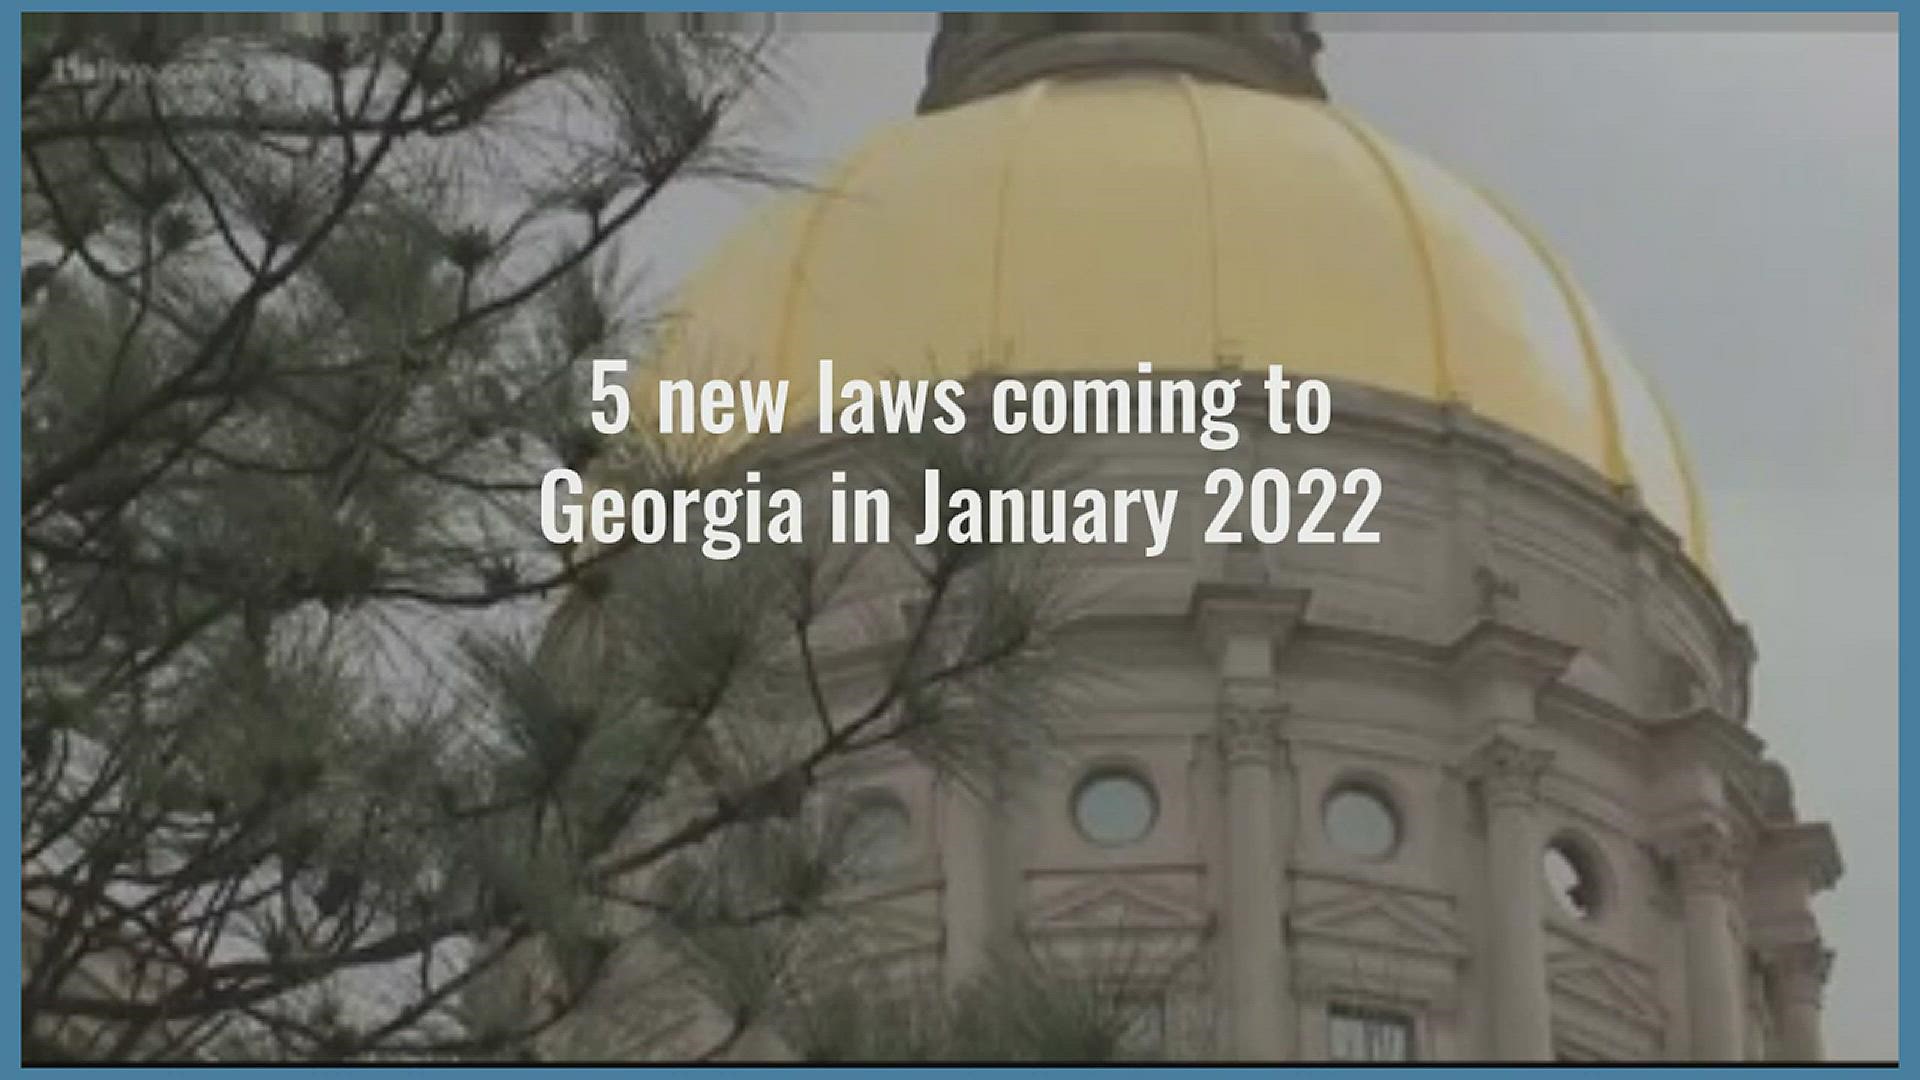 Several bills signed by Gov. Brian Kemp during the 2021-2022 legislative session will take effect.